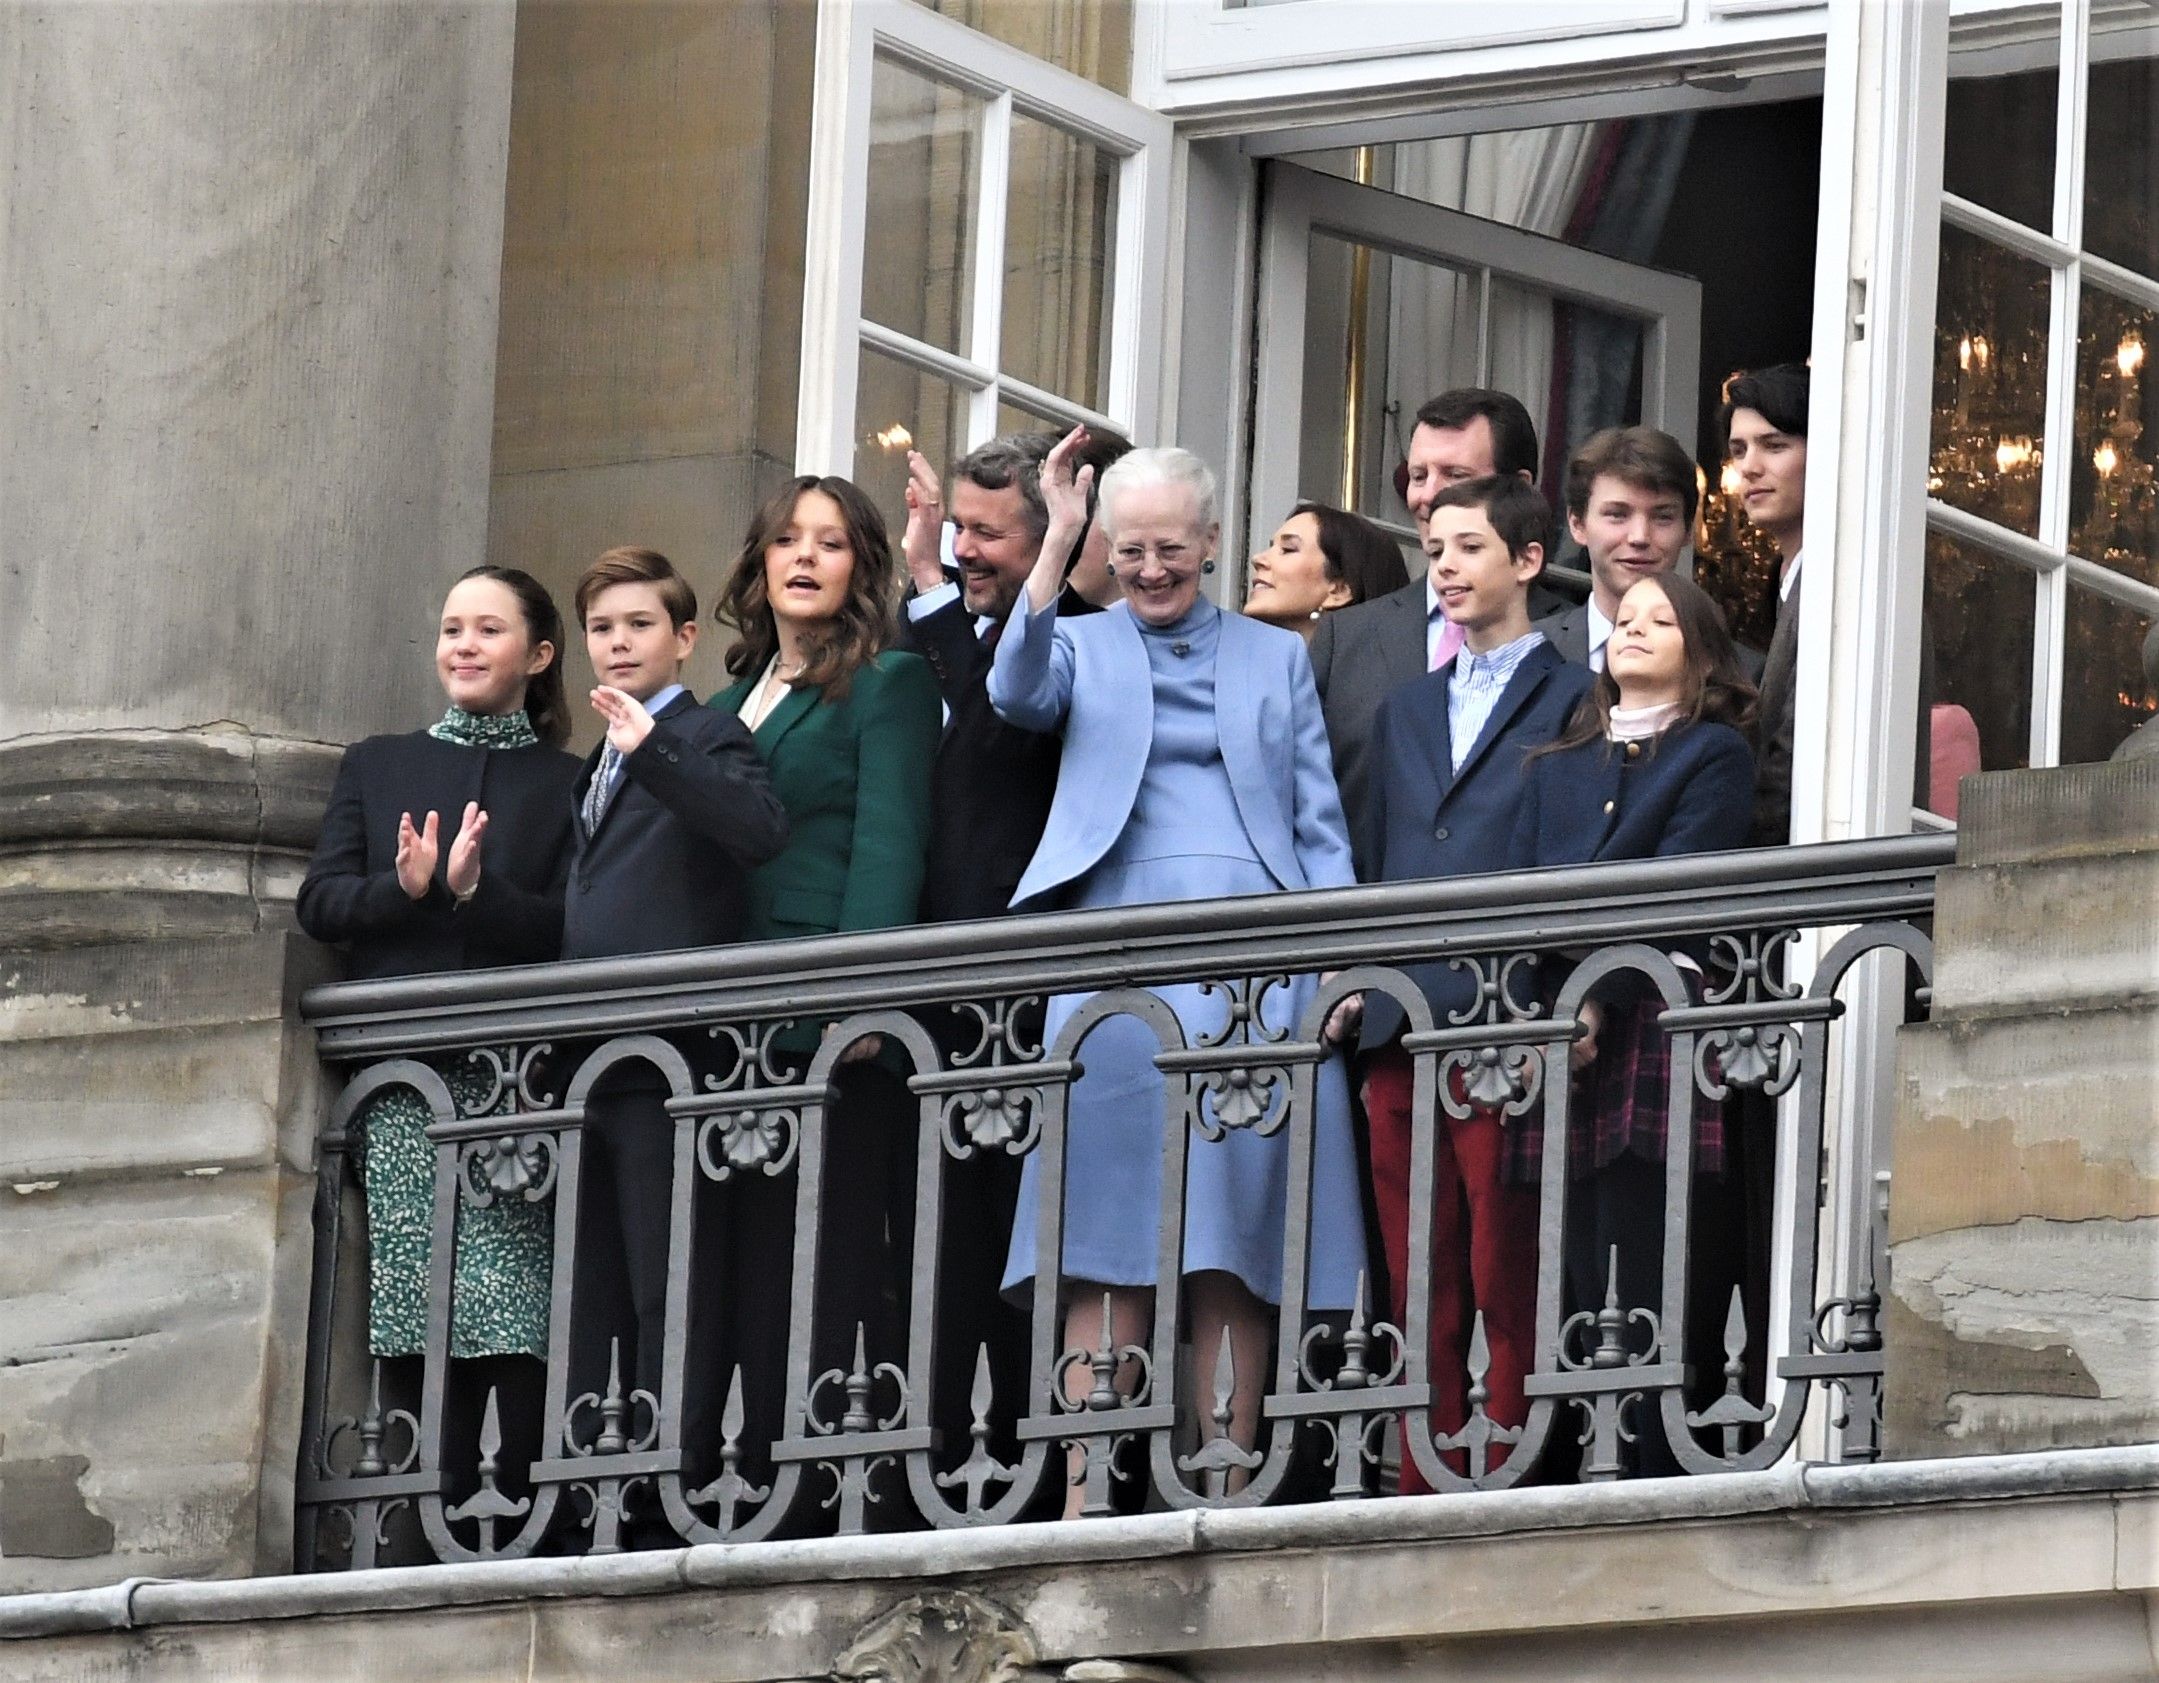 Royal family gathers for Christmas after conflict